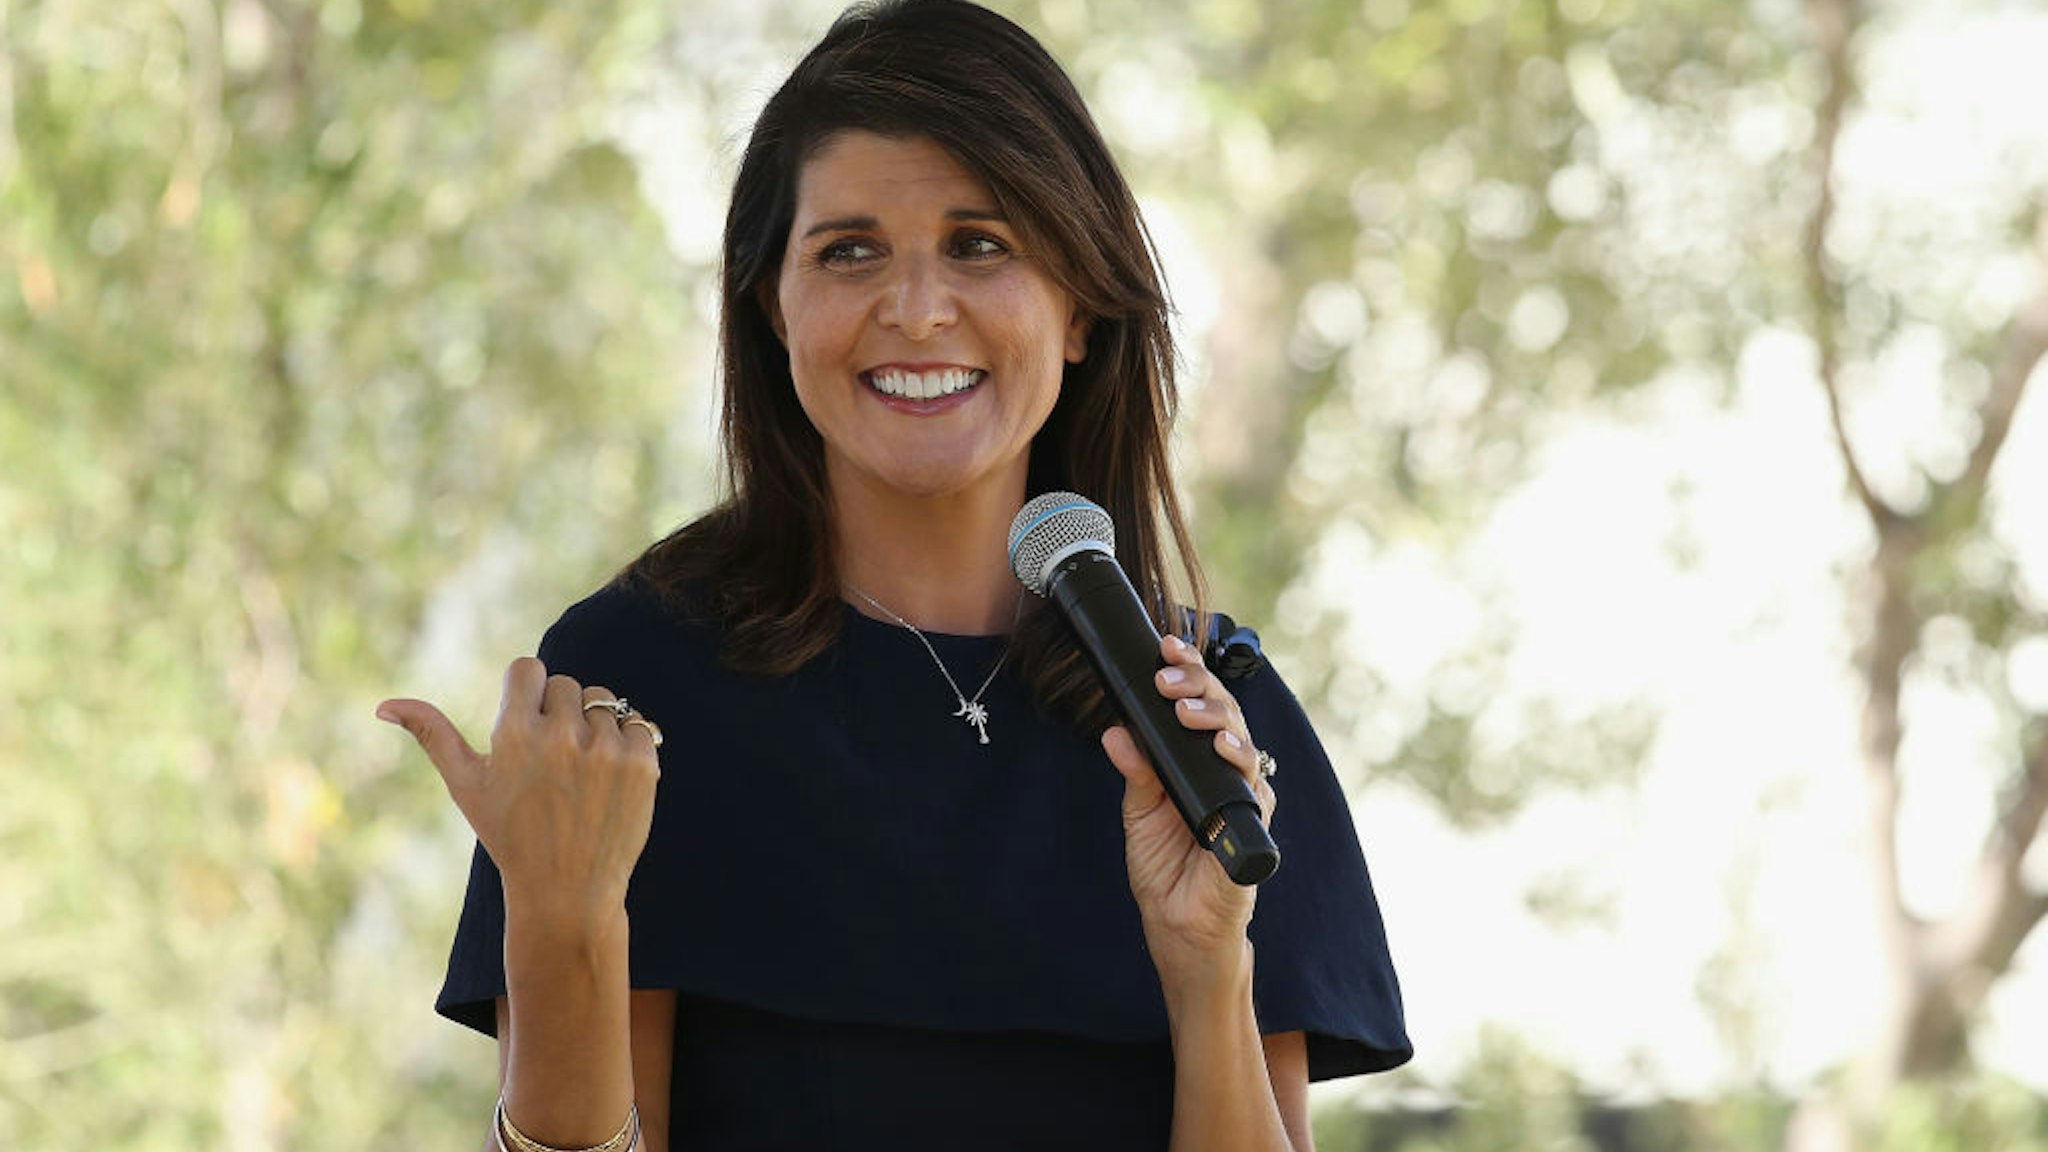 SCOTTSDALE, ARIZONA - OCTOBER 12: Former U.N. Ambassador Nikki Haley speaks at a campaign event for U.S. Sen. Martha McSally (R-AZ) on October 12, 2020 in Scottsdale, Arizona. McSally is looking to gain ground against Democratic Senate candidate and retired astronaut Mark Kelly, who, according to reports, is leading in polling and fundraising. (Photo by Christian Petersen/Getty Images)